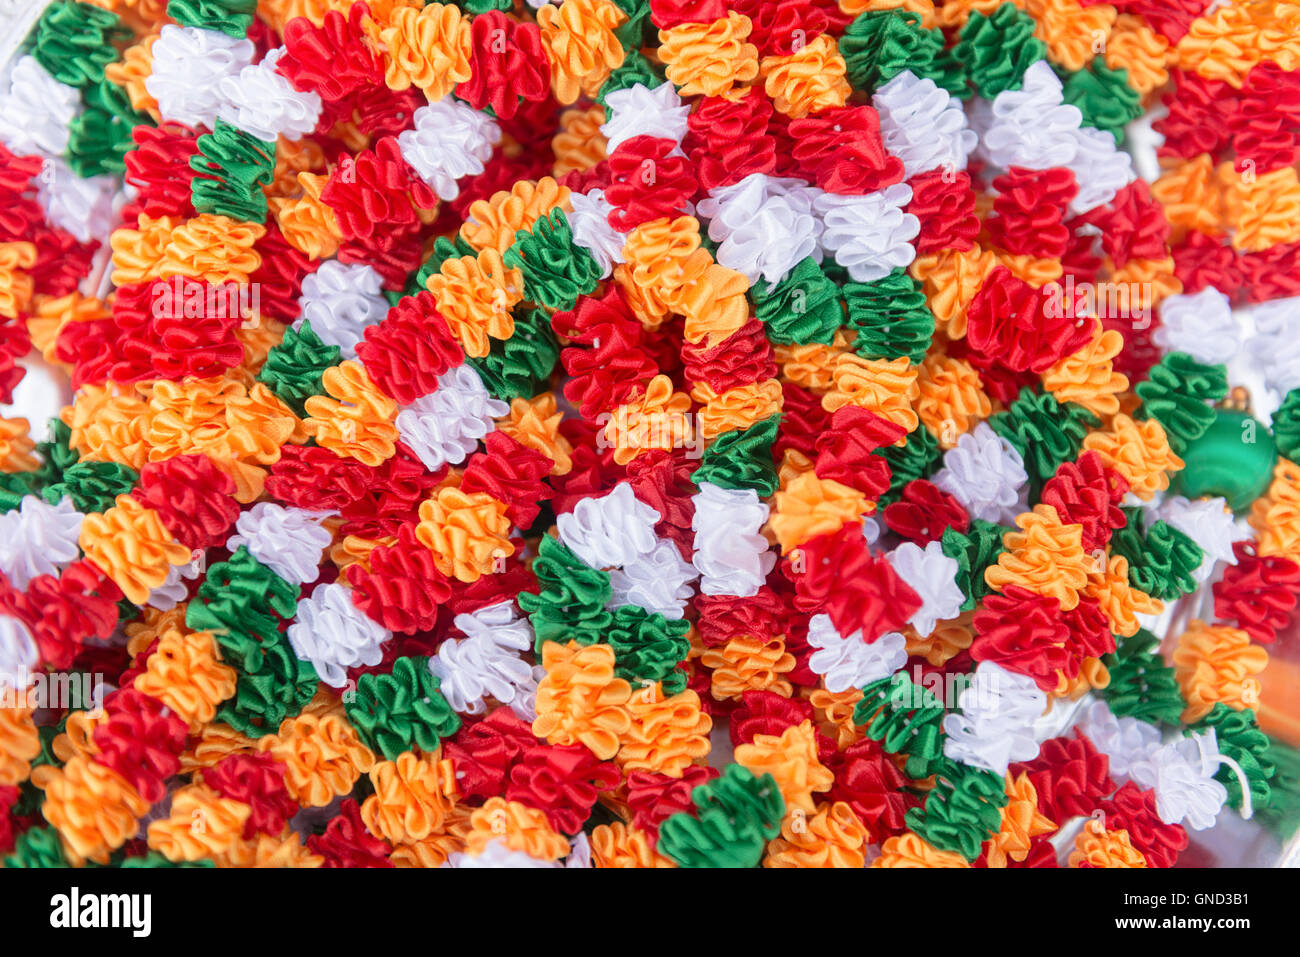 Indian traditional culture stuff from colourful fabrics white red green orange for holy religious ritual. Useful for background. Stock Photo